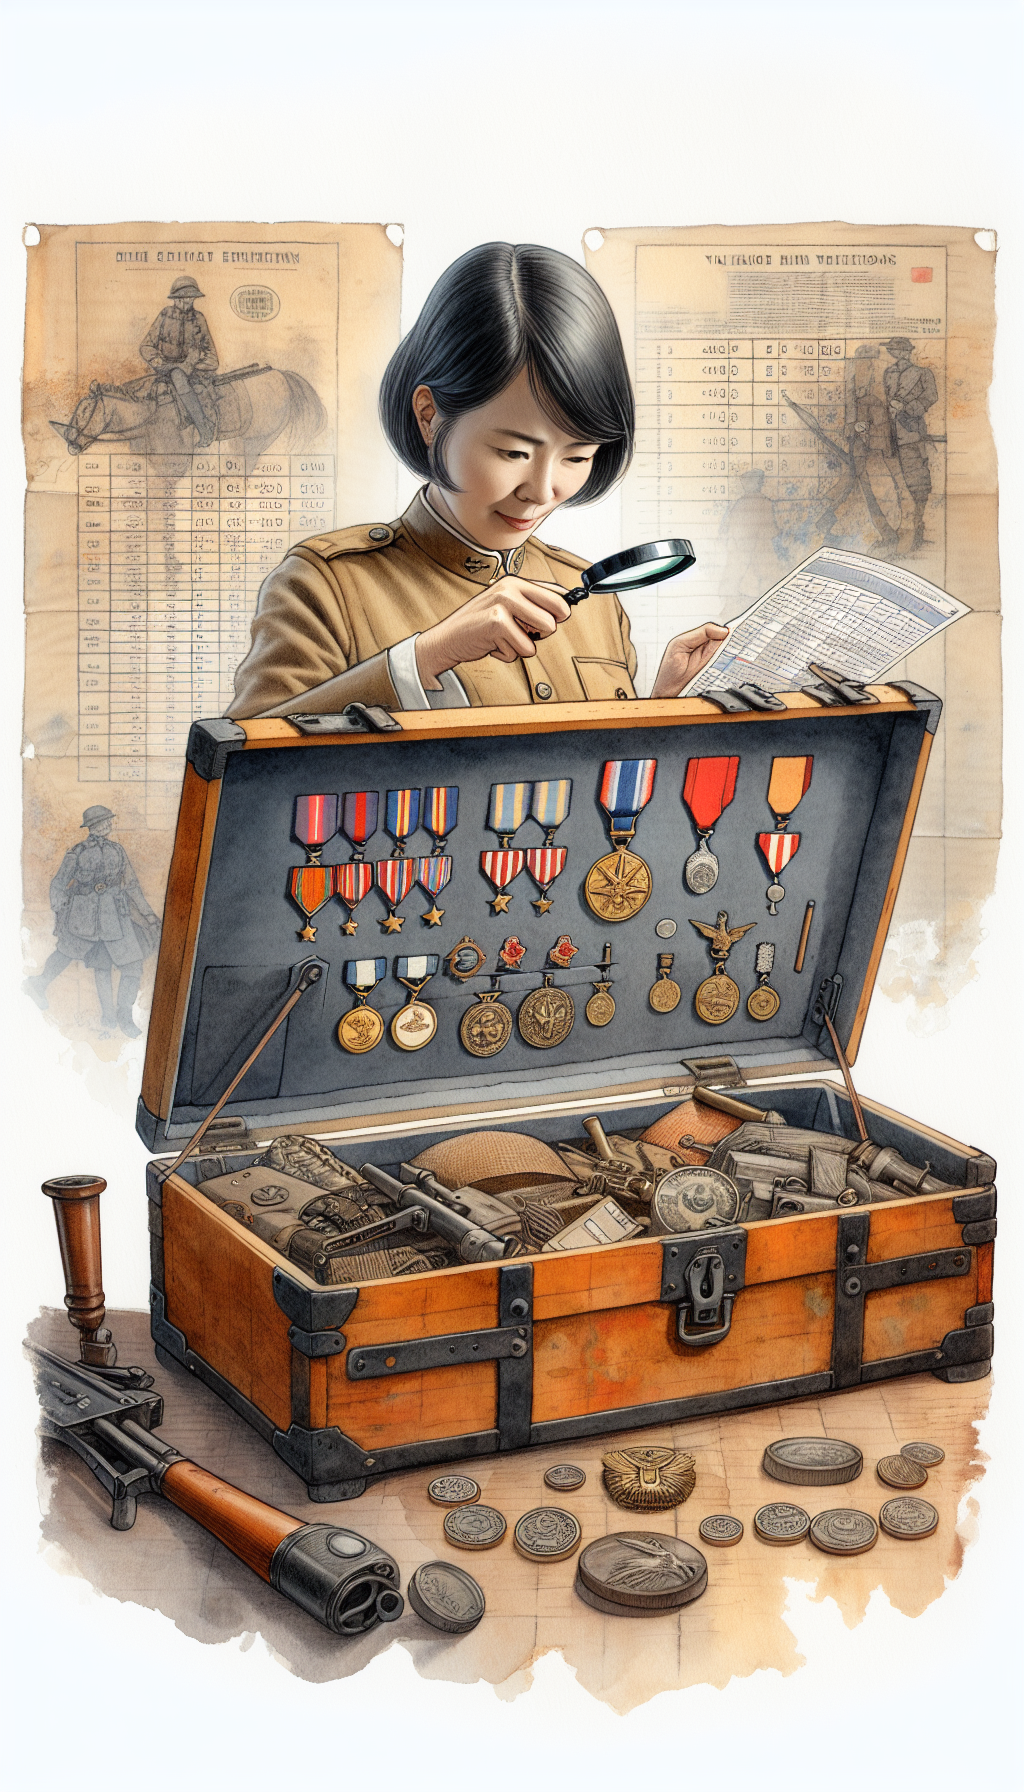 An illustration displays an expert appraiser examining an open, vintage military trunk filled with diverse antiques. A magnifying glass in hand reveals intricate details on medals, uniforms, and weapons, while a valuation chart hovers above. The trunk bears distinctive marks for identification against a backdrop of faded battle maps, blending watercolor textures with crisp ink lines for contrast.